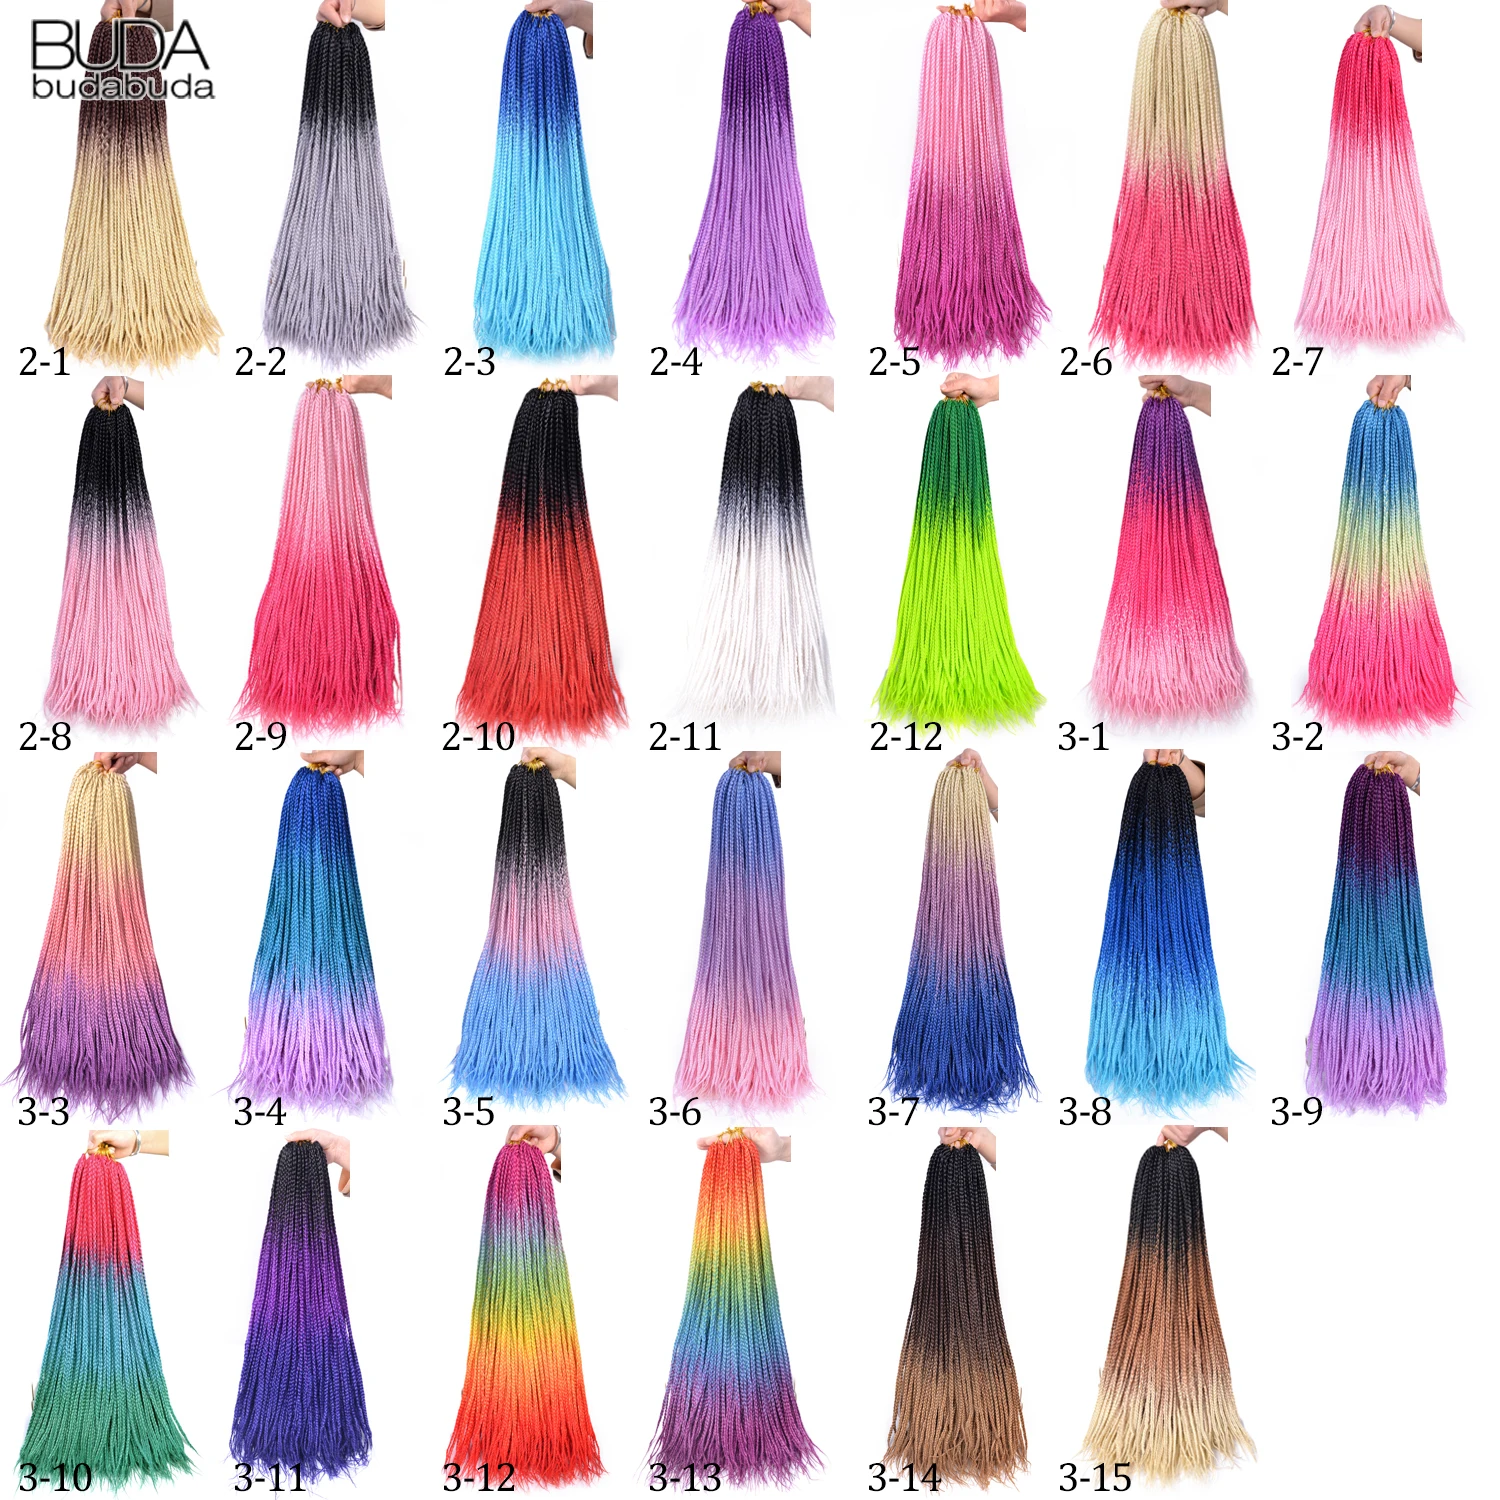 Synthetic Braiding Hair Extension Box Braids Crochet Braids Hair 24inch Ombre Thin Box Braids Hair for Africa America Women